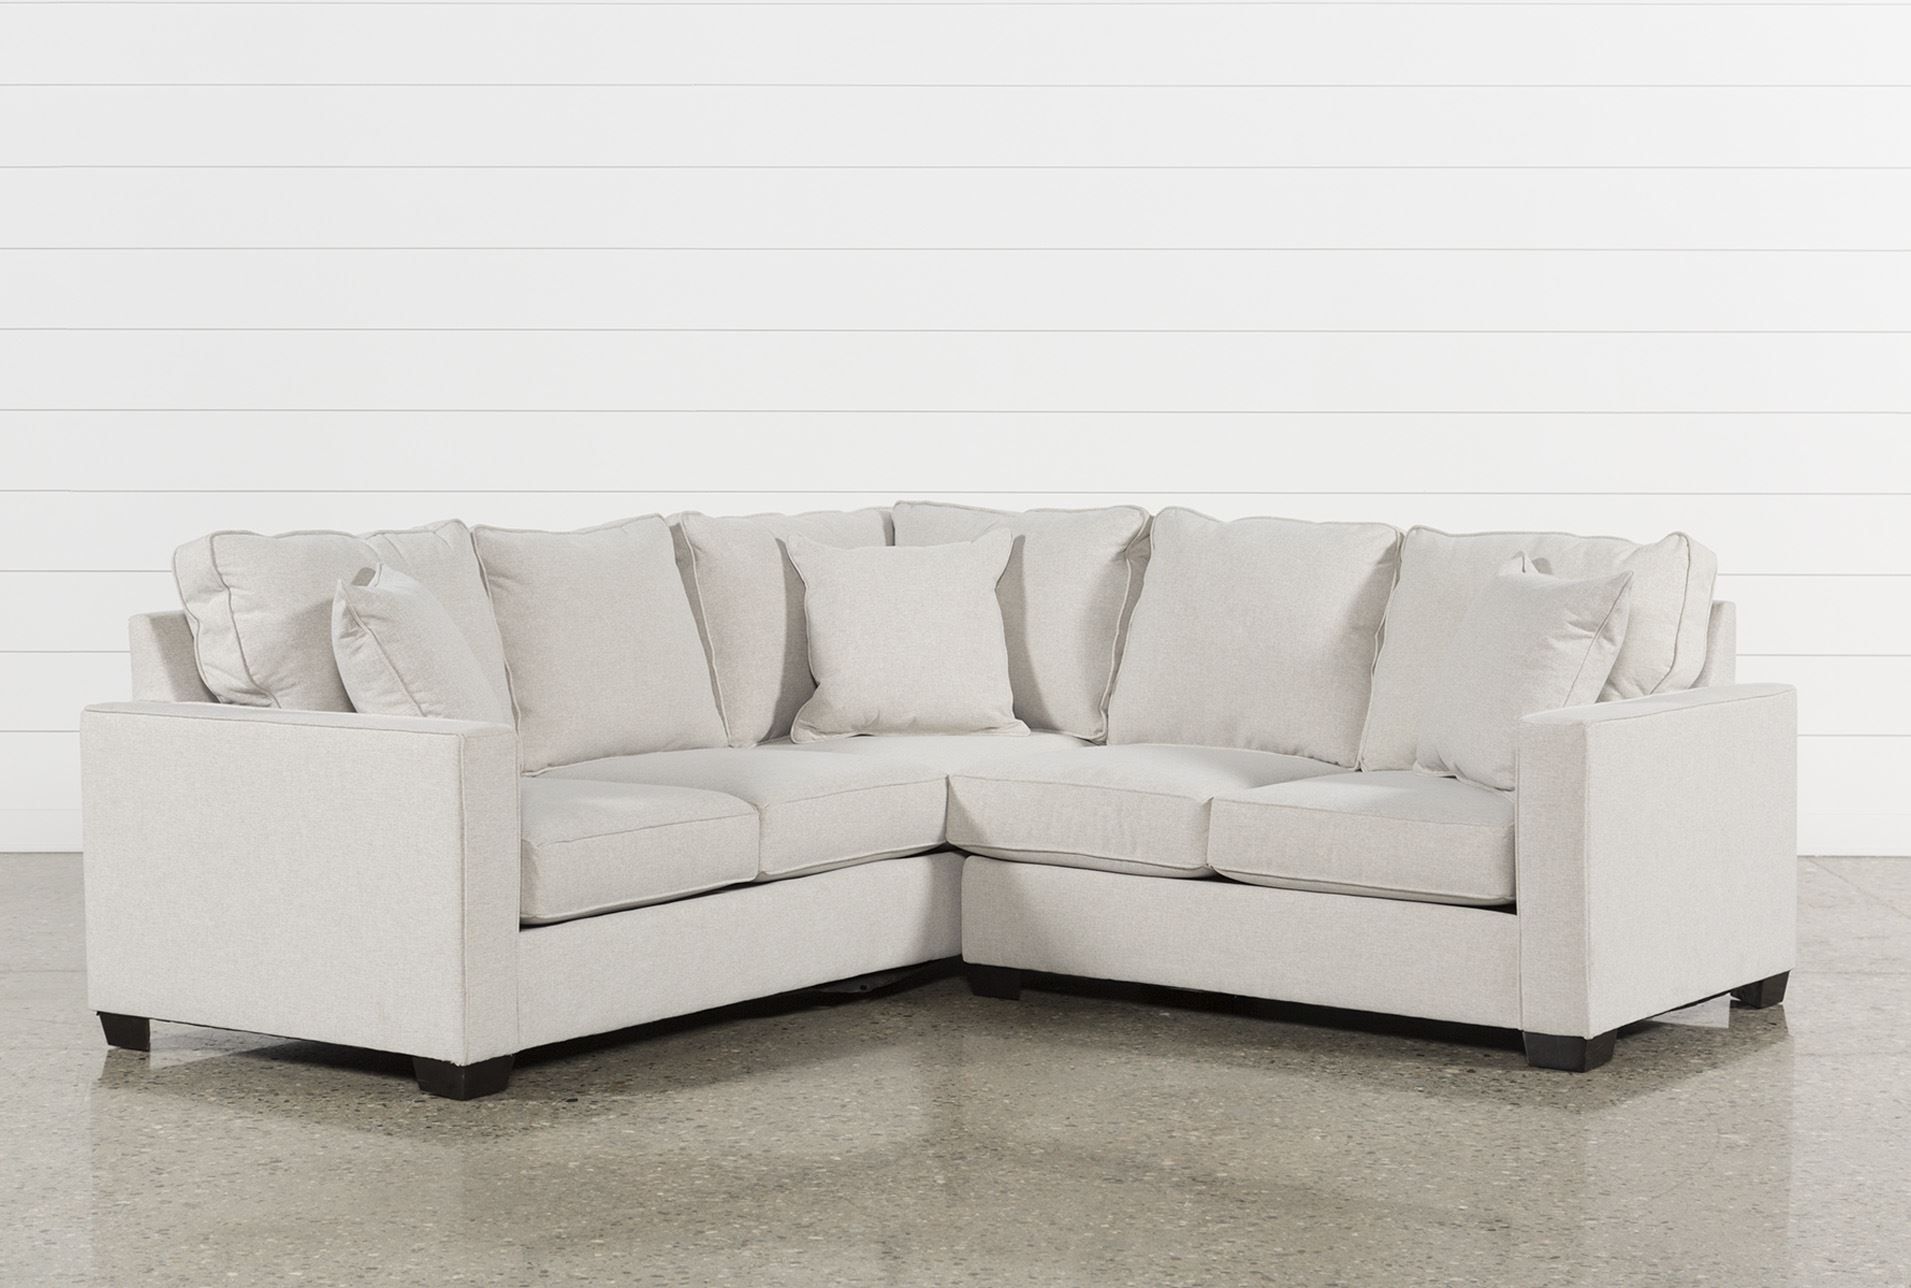 Raphael Ii Flax 2 Piece Sectionalw/raf Loveseat, Beige, Sofas Throughout Marissa Ii 3 Piece Sectionals (View 5 of 30)